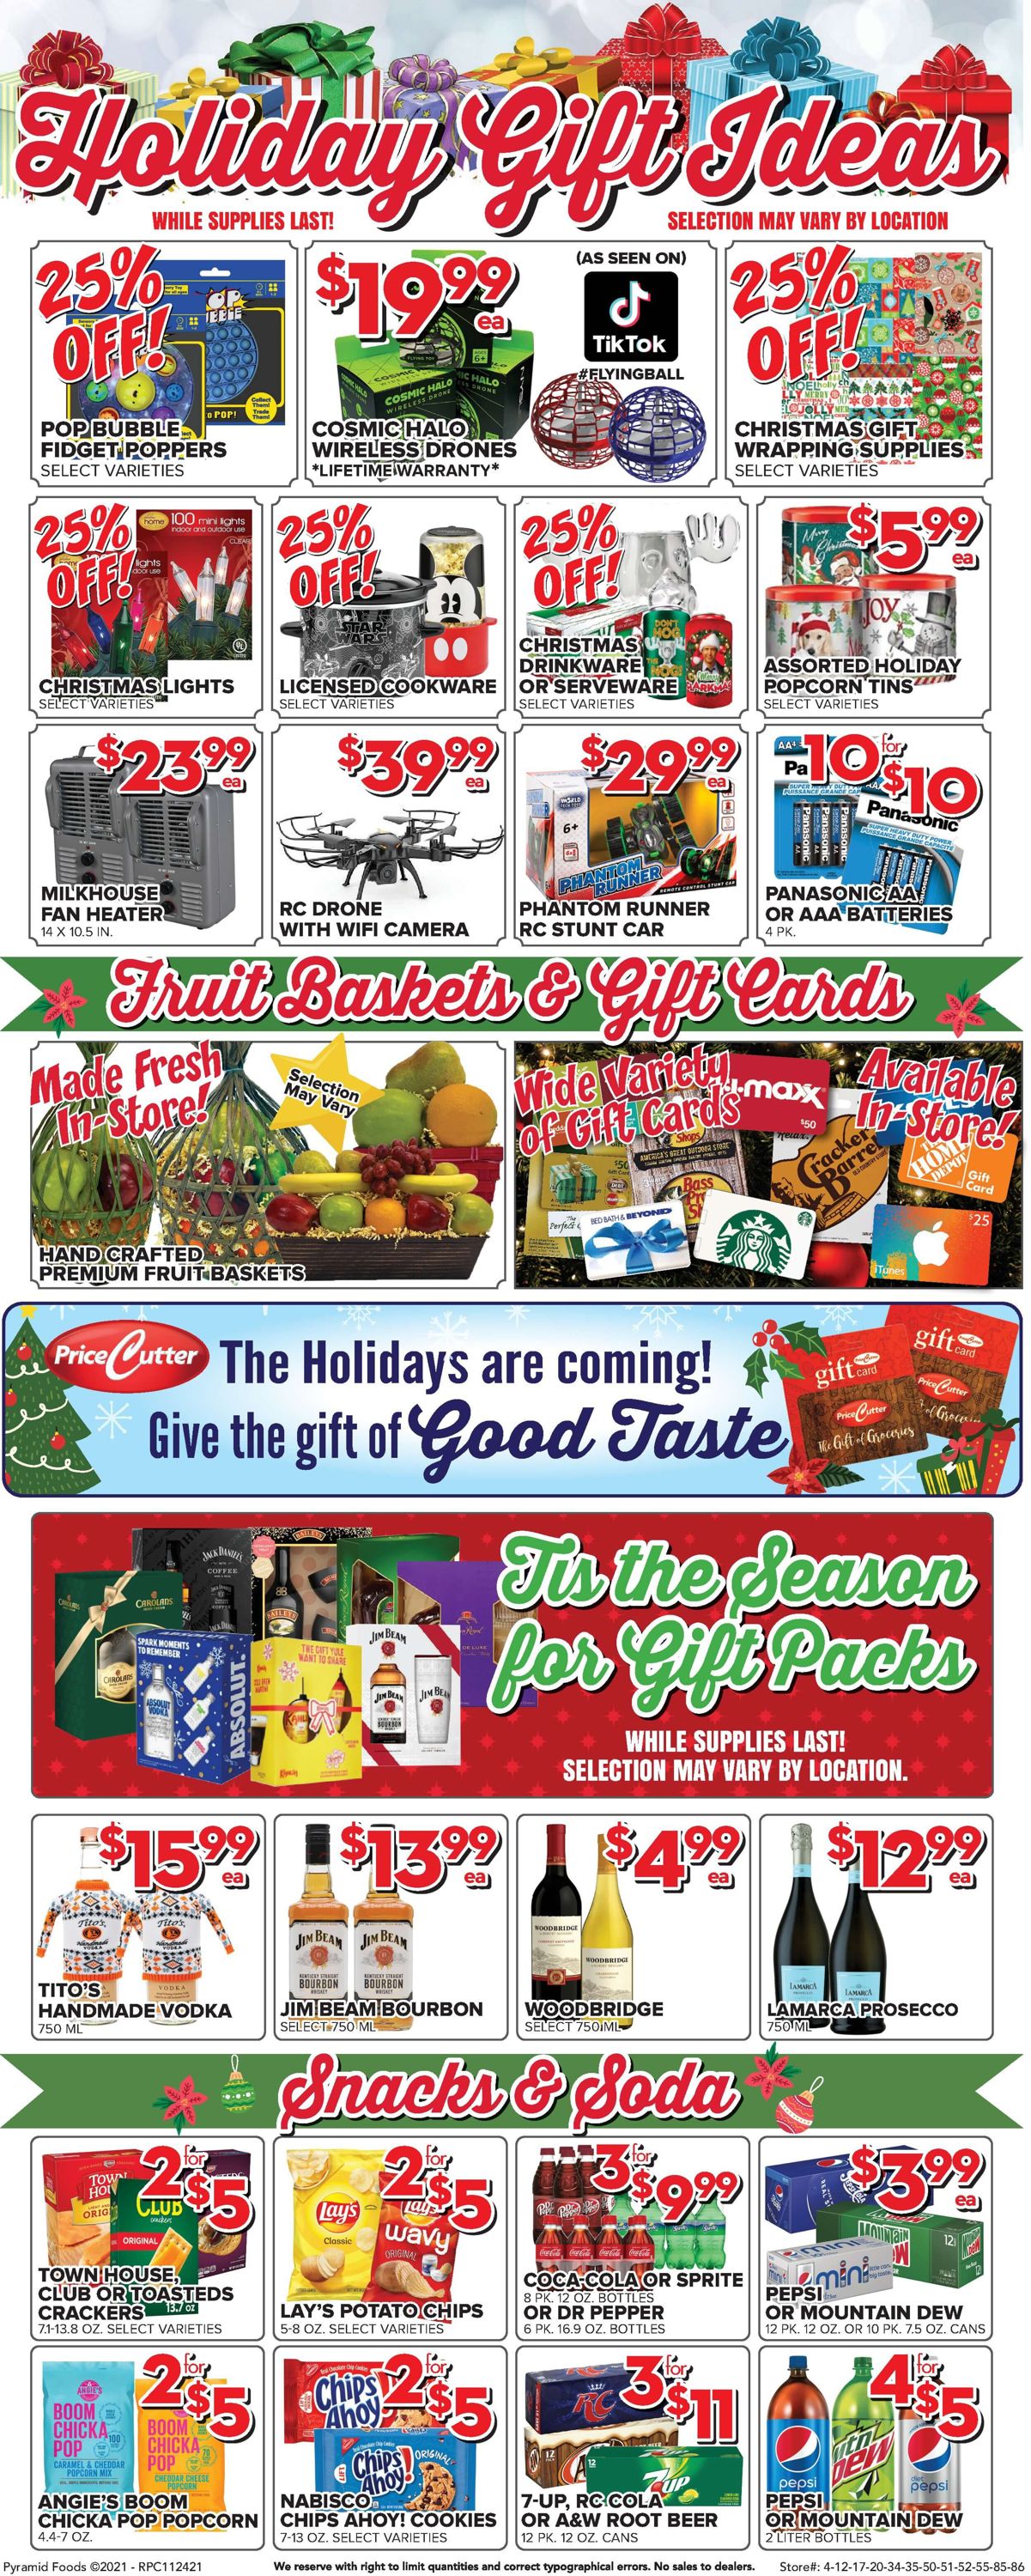 Price Cutter HOLIDAY 2021 Weekly Ad Circular - valid 11/24-11/30/2021 (Page 4)